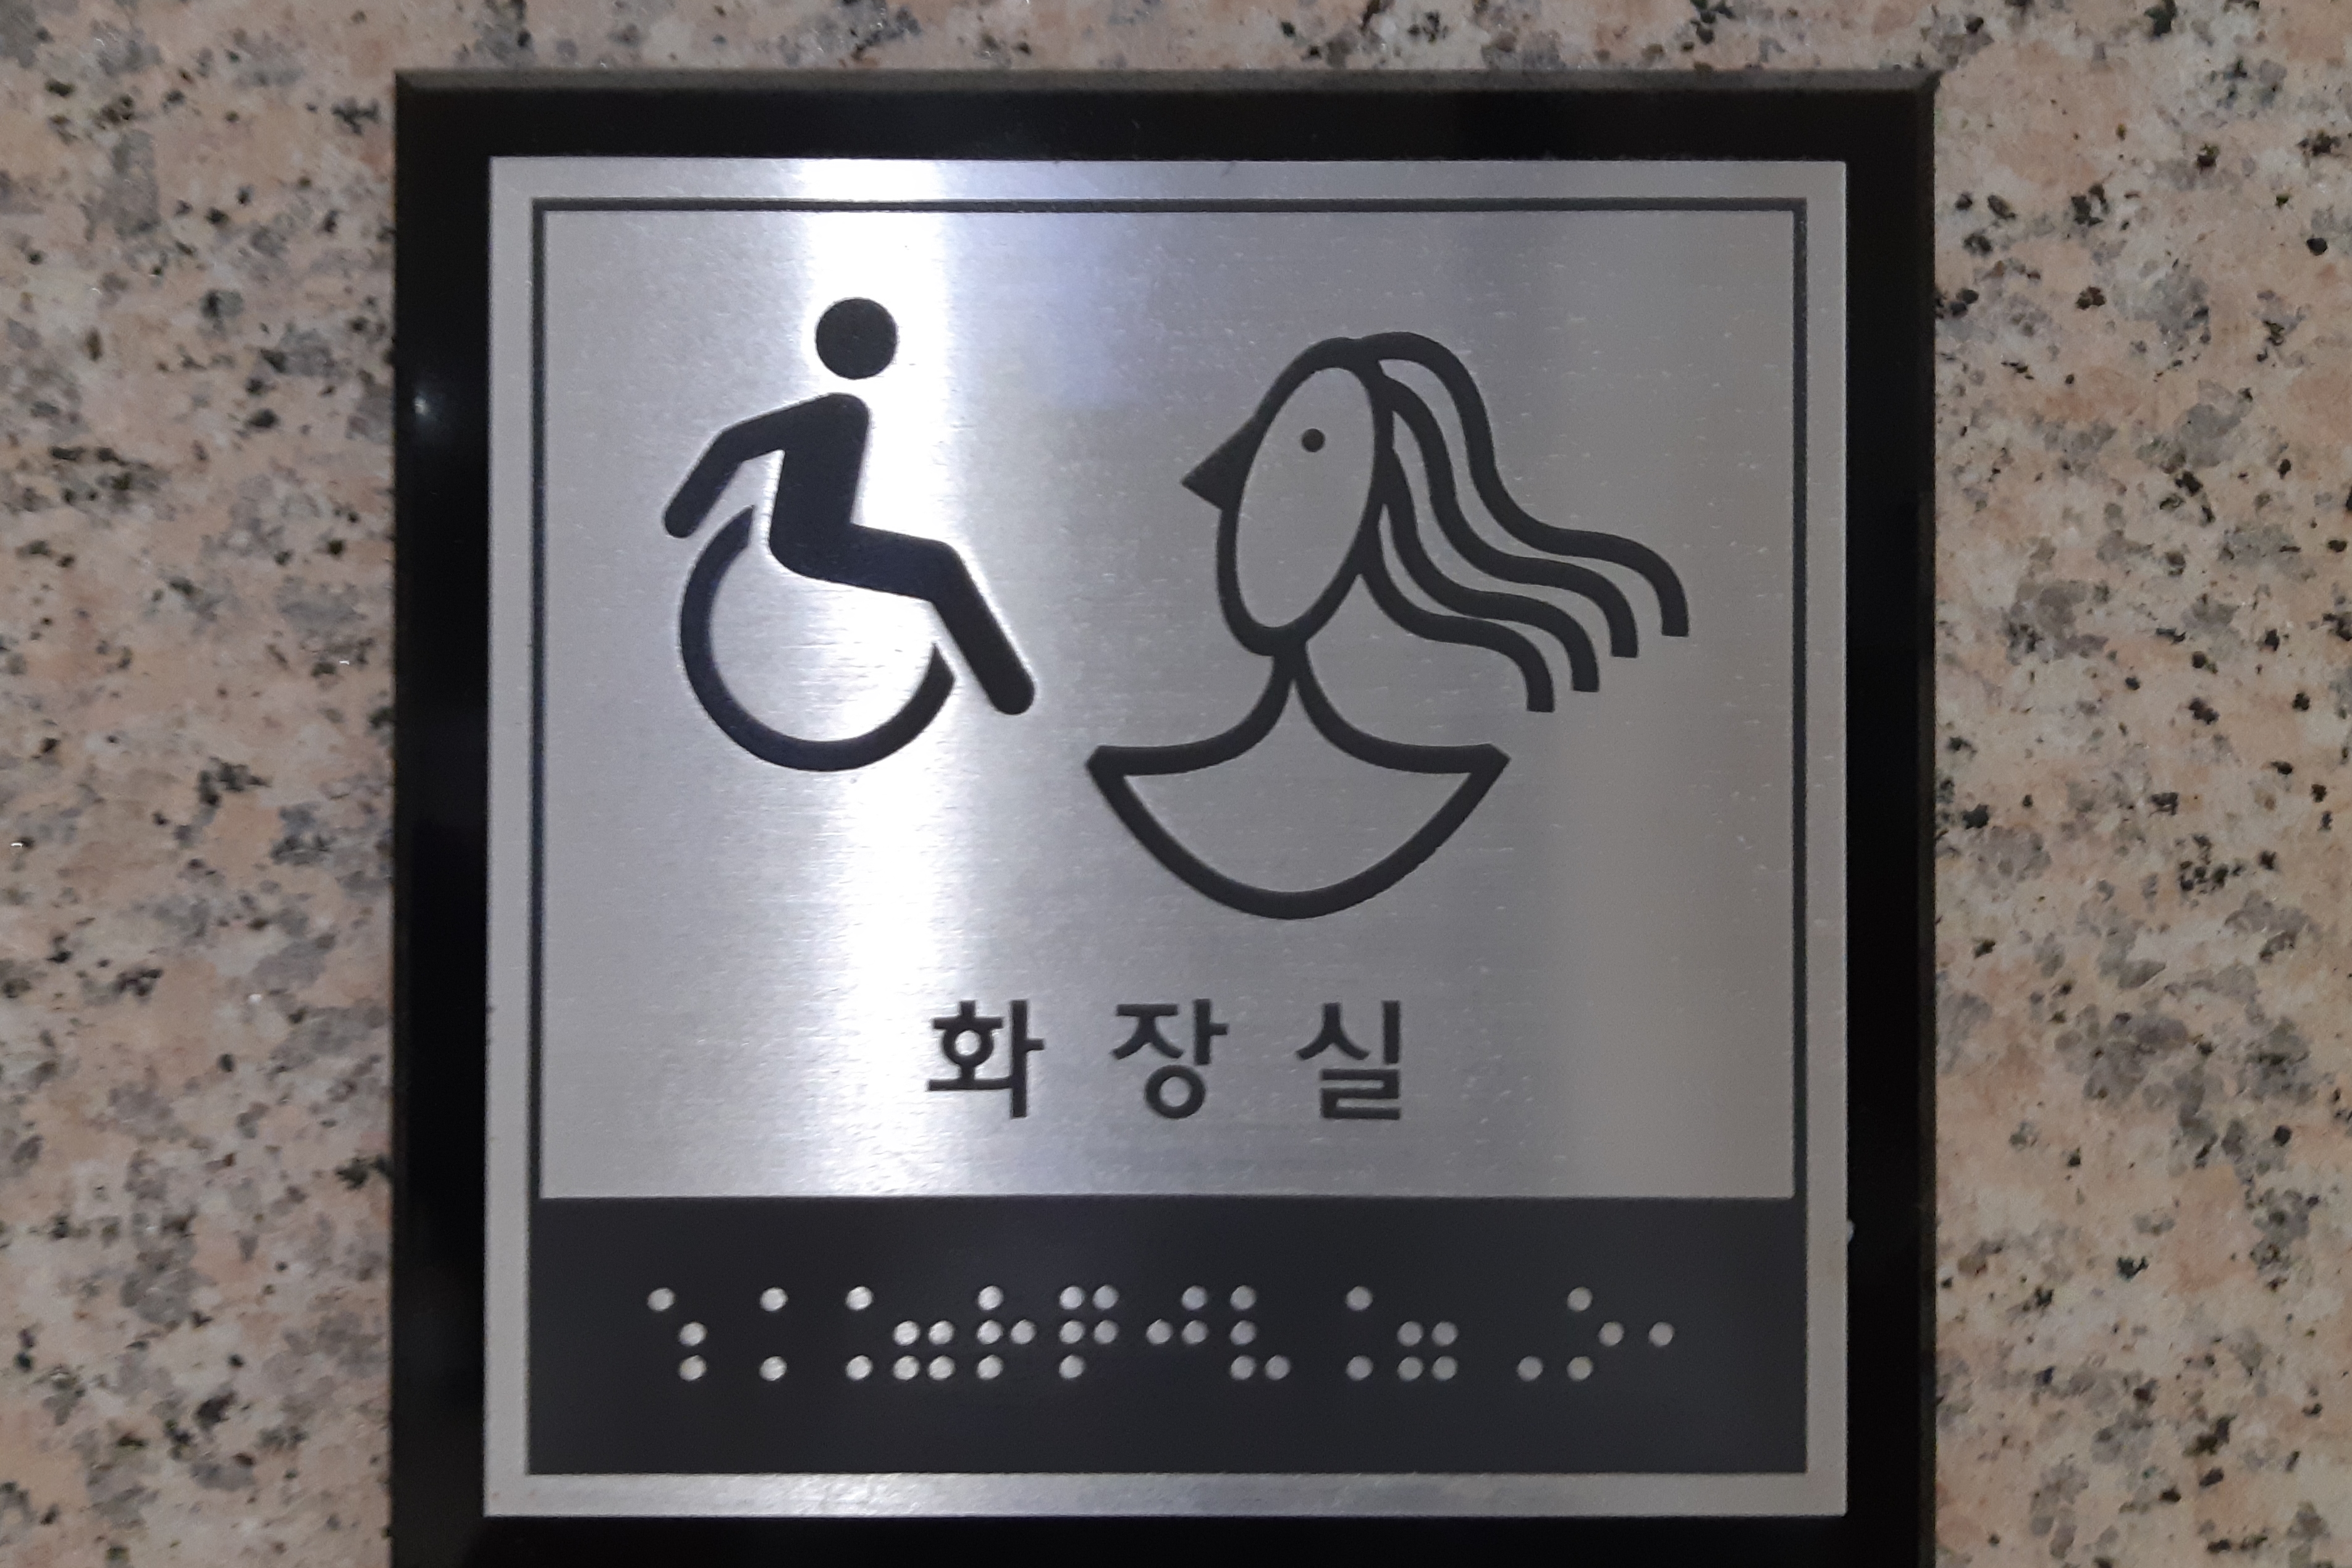 Accessible restroom for persons with disabilities0 : Sign on the wall about accessible restroom with wheelchair, woman symbol and Korean breille